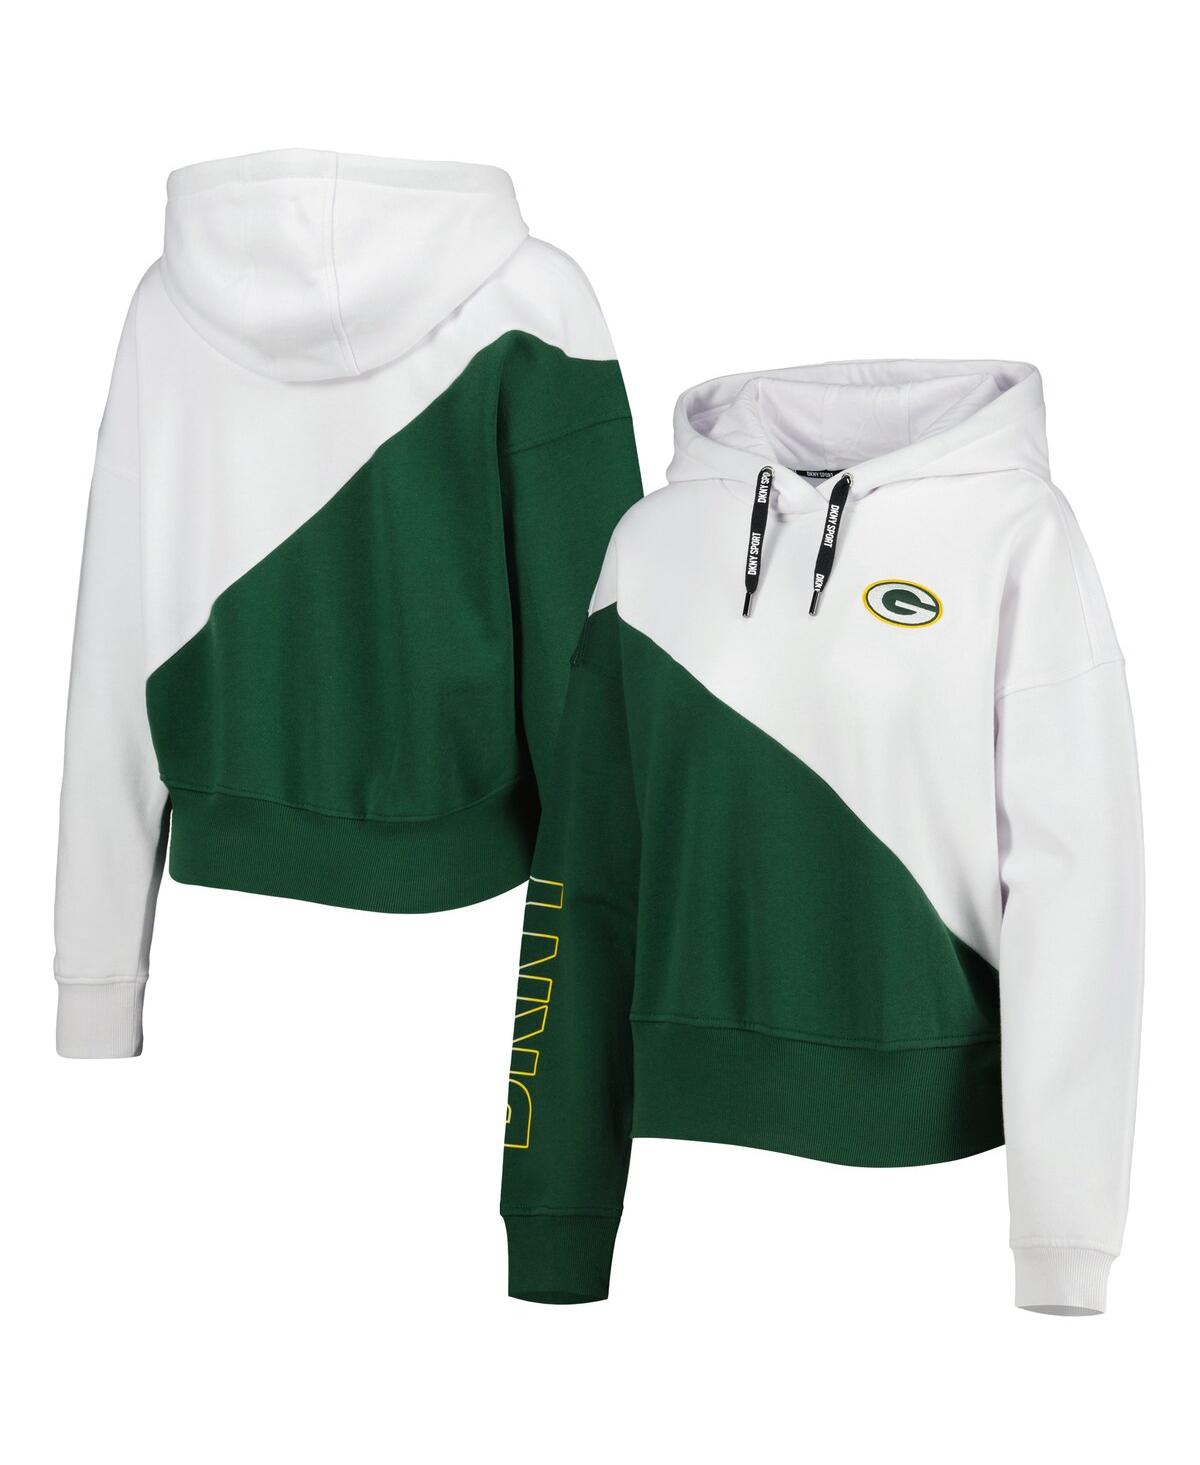 Women's Dkny Sport White and Green Green Bay Packers Bobbi Color Blocked Pullover Hoodie - White, Green